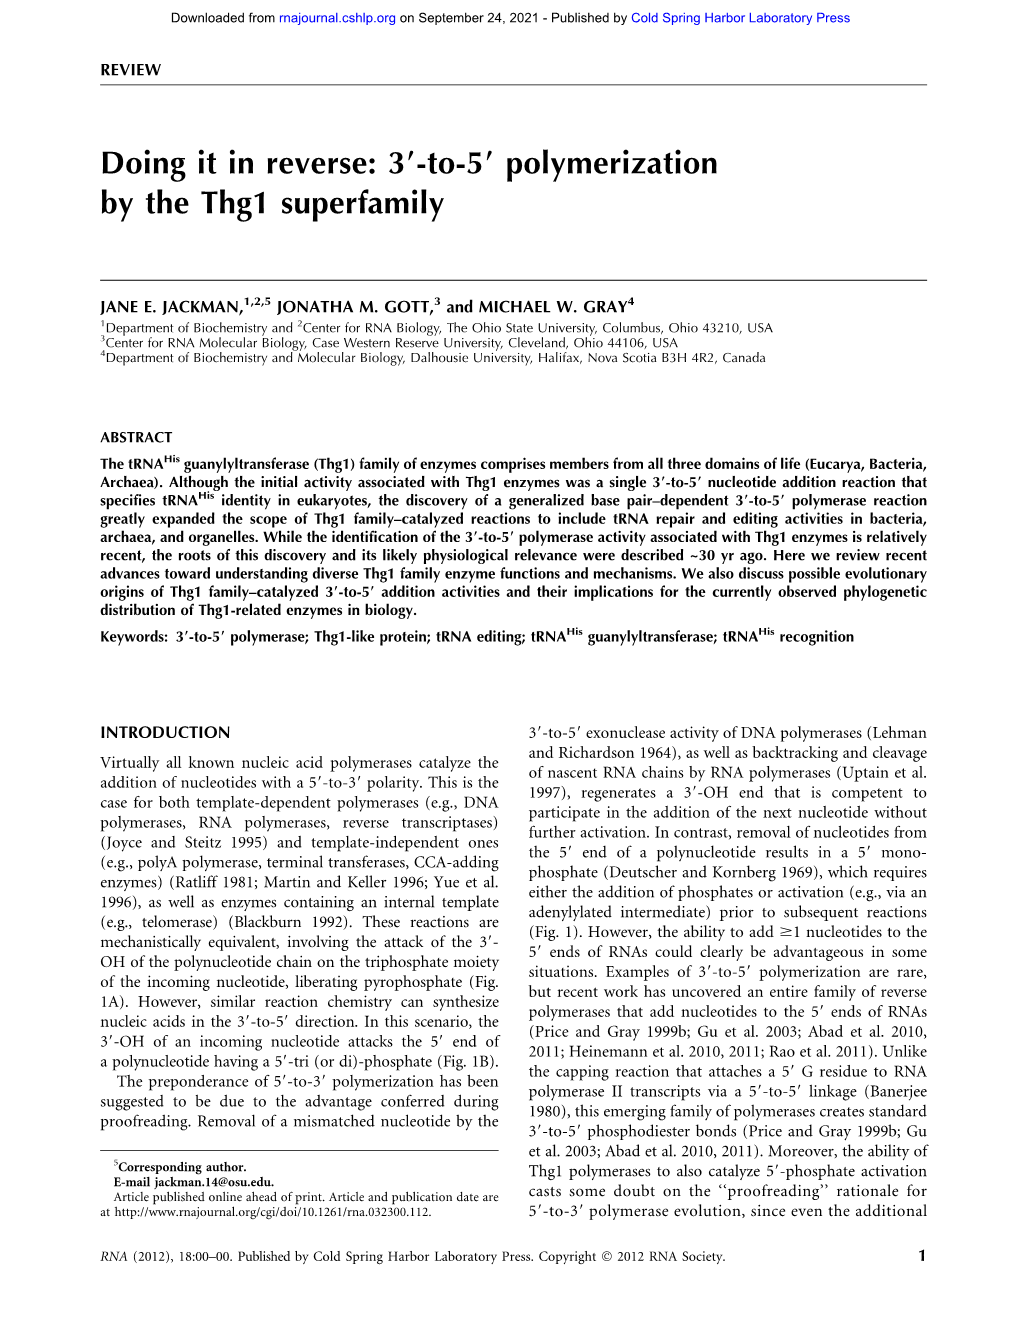 39-To-59 Polymerization by the Thg1 Superfamily